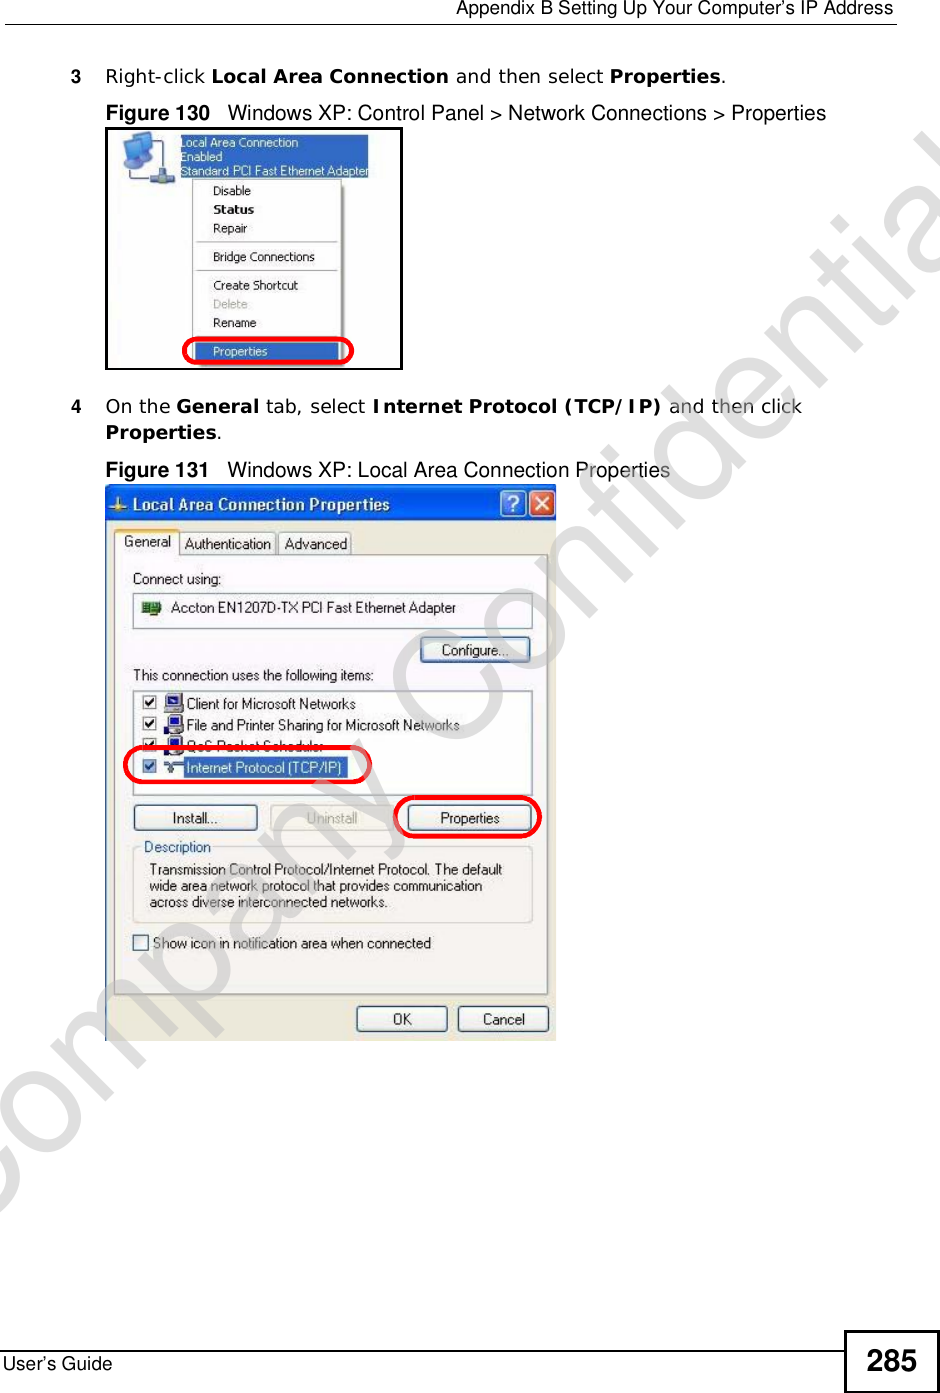  Appendix BSetting Up Your Computer’s IP AddressUser’s Guide 2853Right-click Local Area Connection and then select Properties.Figure 130   Windows XP: Control Panel &gt; Network Connections &gt; Properties4On the General tab, select Internet Protocol (TCP/IP) and then click Properties.Figure 131   Windows XP: Local Area Connection PropertiesCompany Confidential